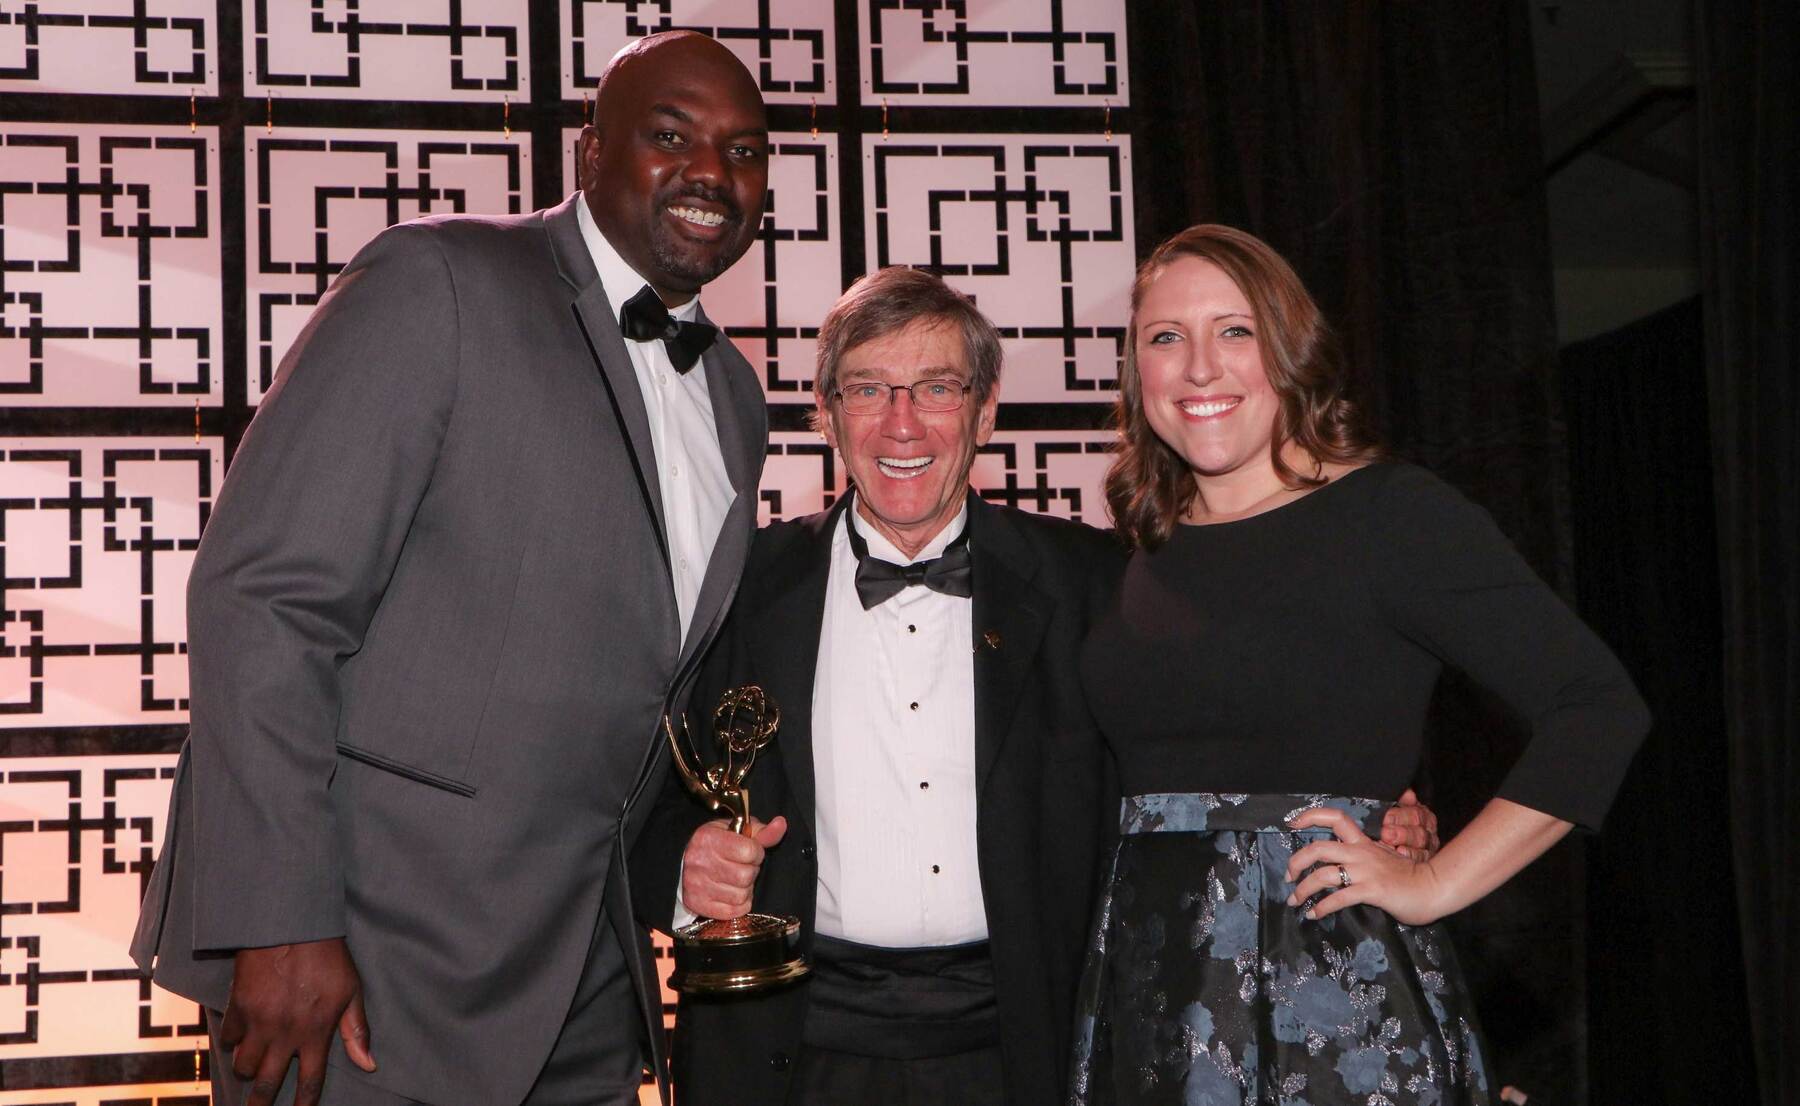 Nathaniel "Big Easy" Lofton, recently retired from the Harlem Globetrotters, presents the Emmy Award to U of I producers Tim Hartin and Kaitlin Southworth.